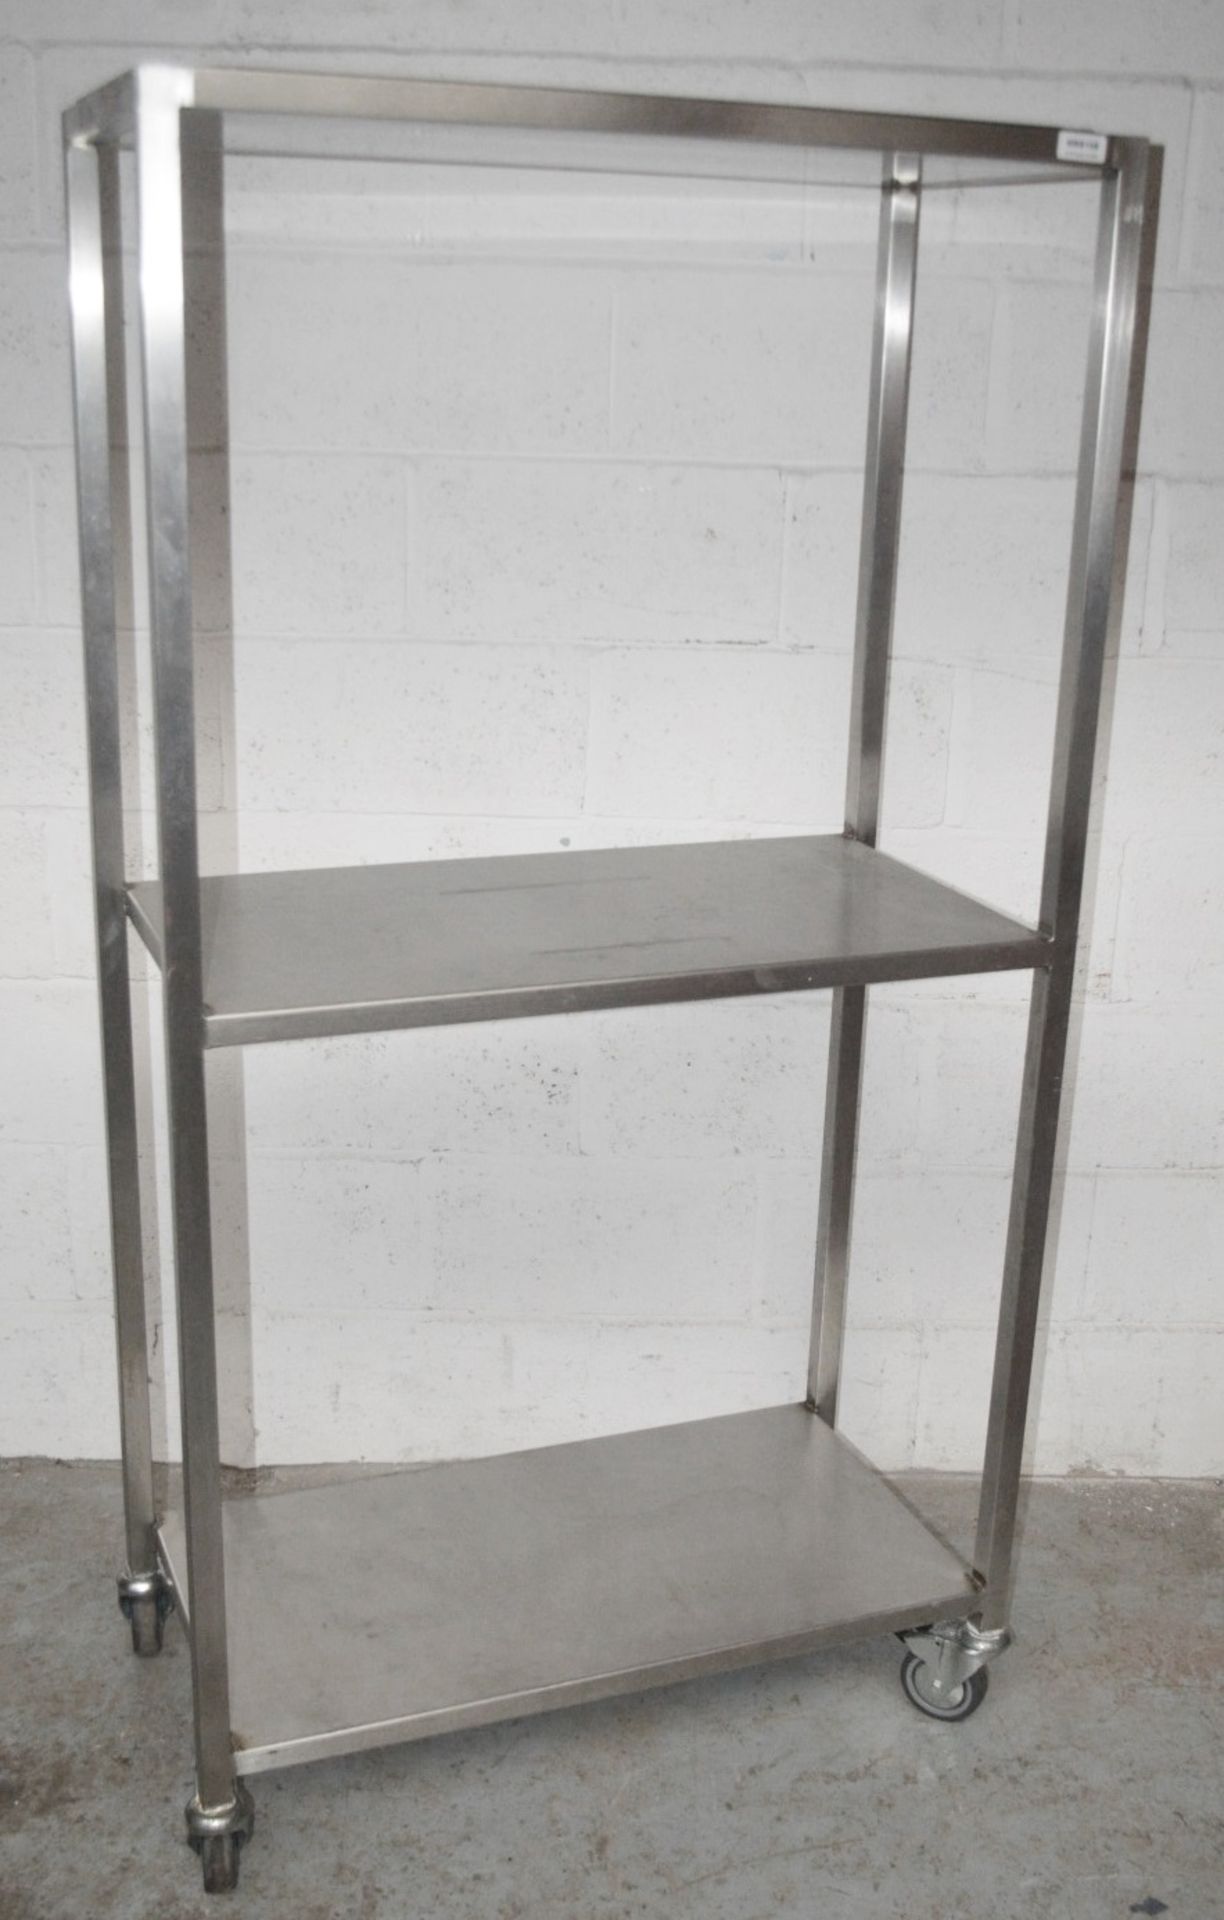 1 x Stainless Steel Commercial Kitchen 3-Tier Shelving Unit On Castors - Dimensions: H170 x W90 x